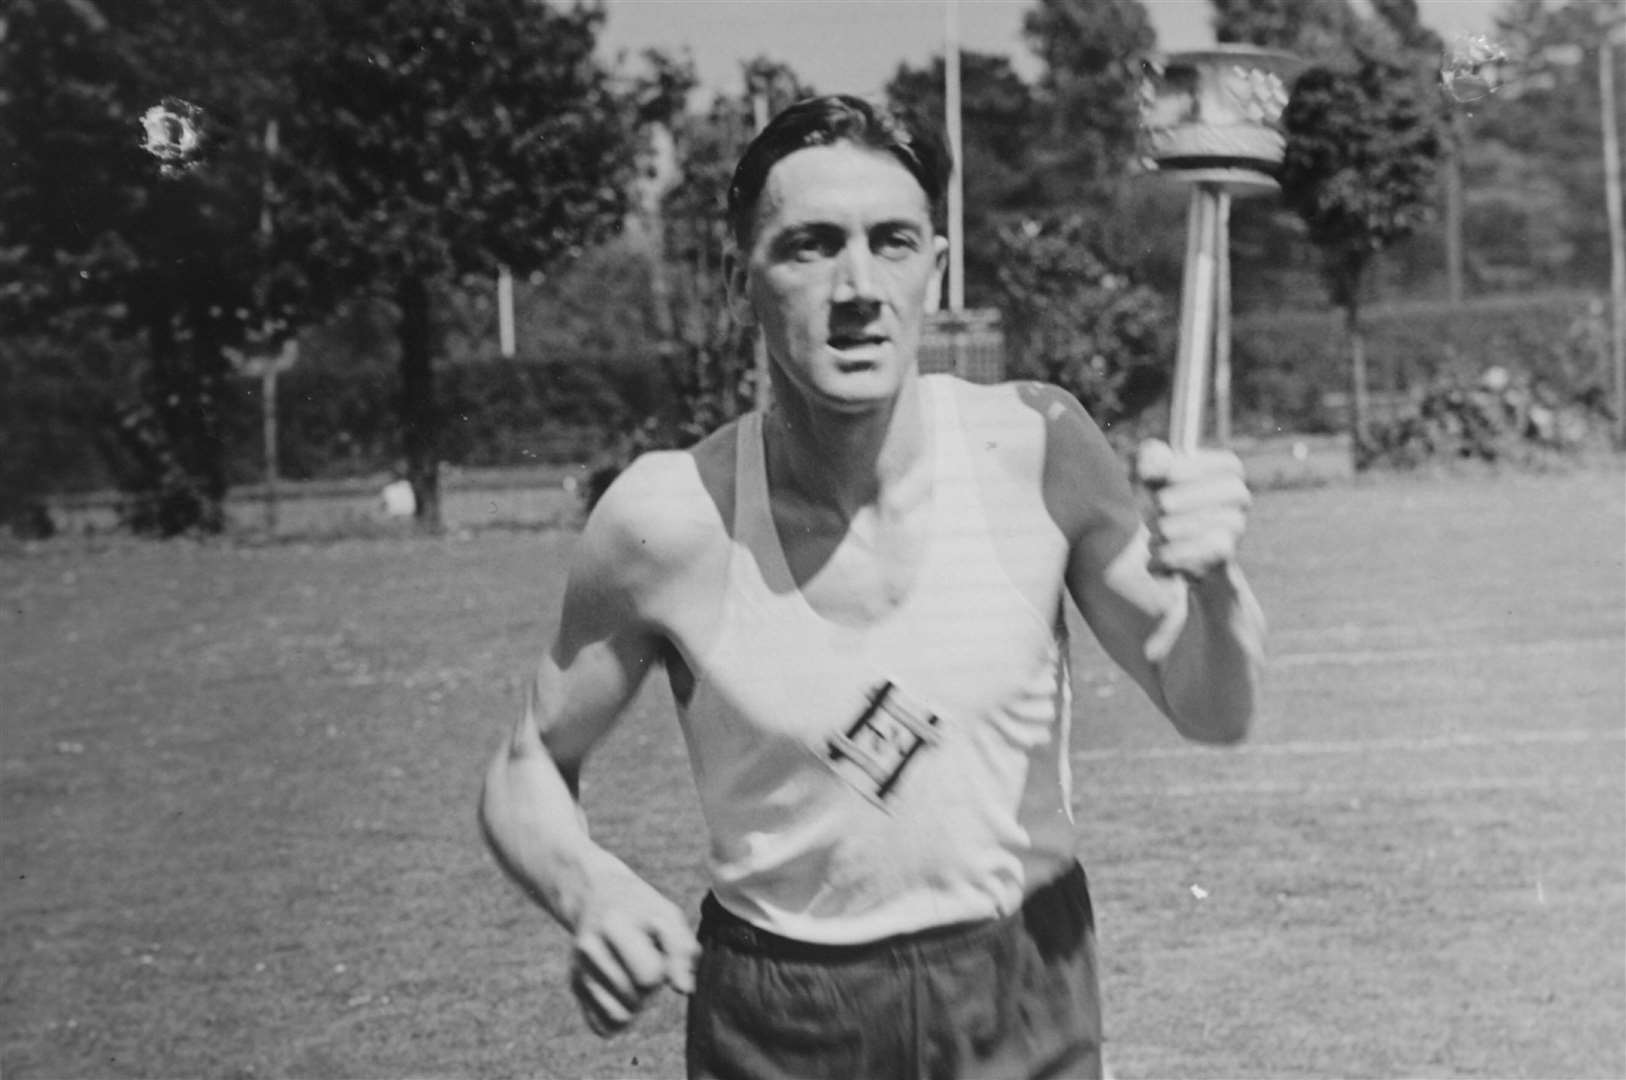 Ron Piles who ran through Kent with the Olympic Torch in 1948